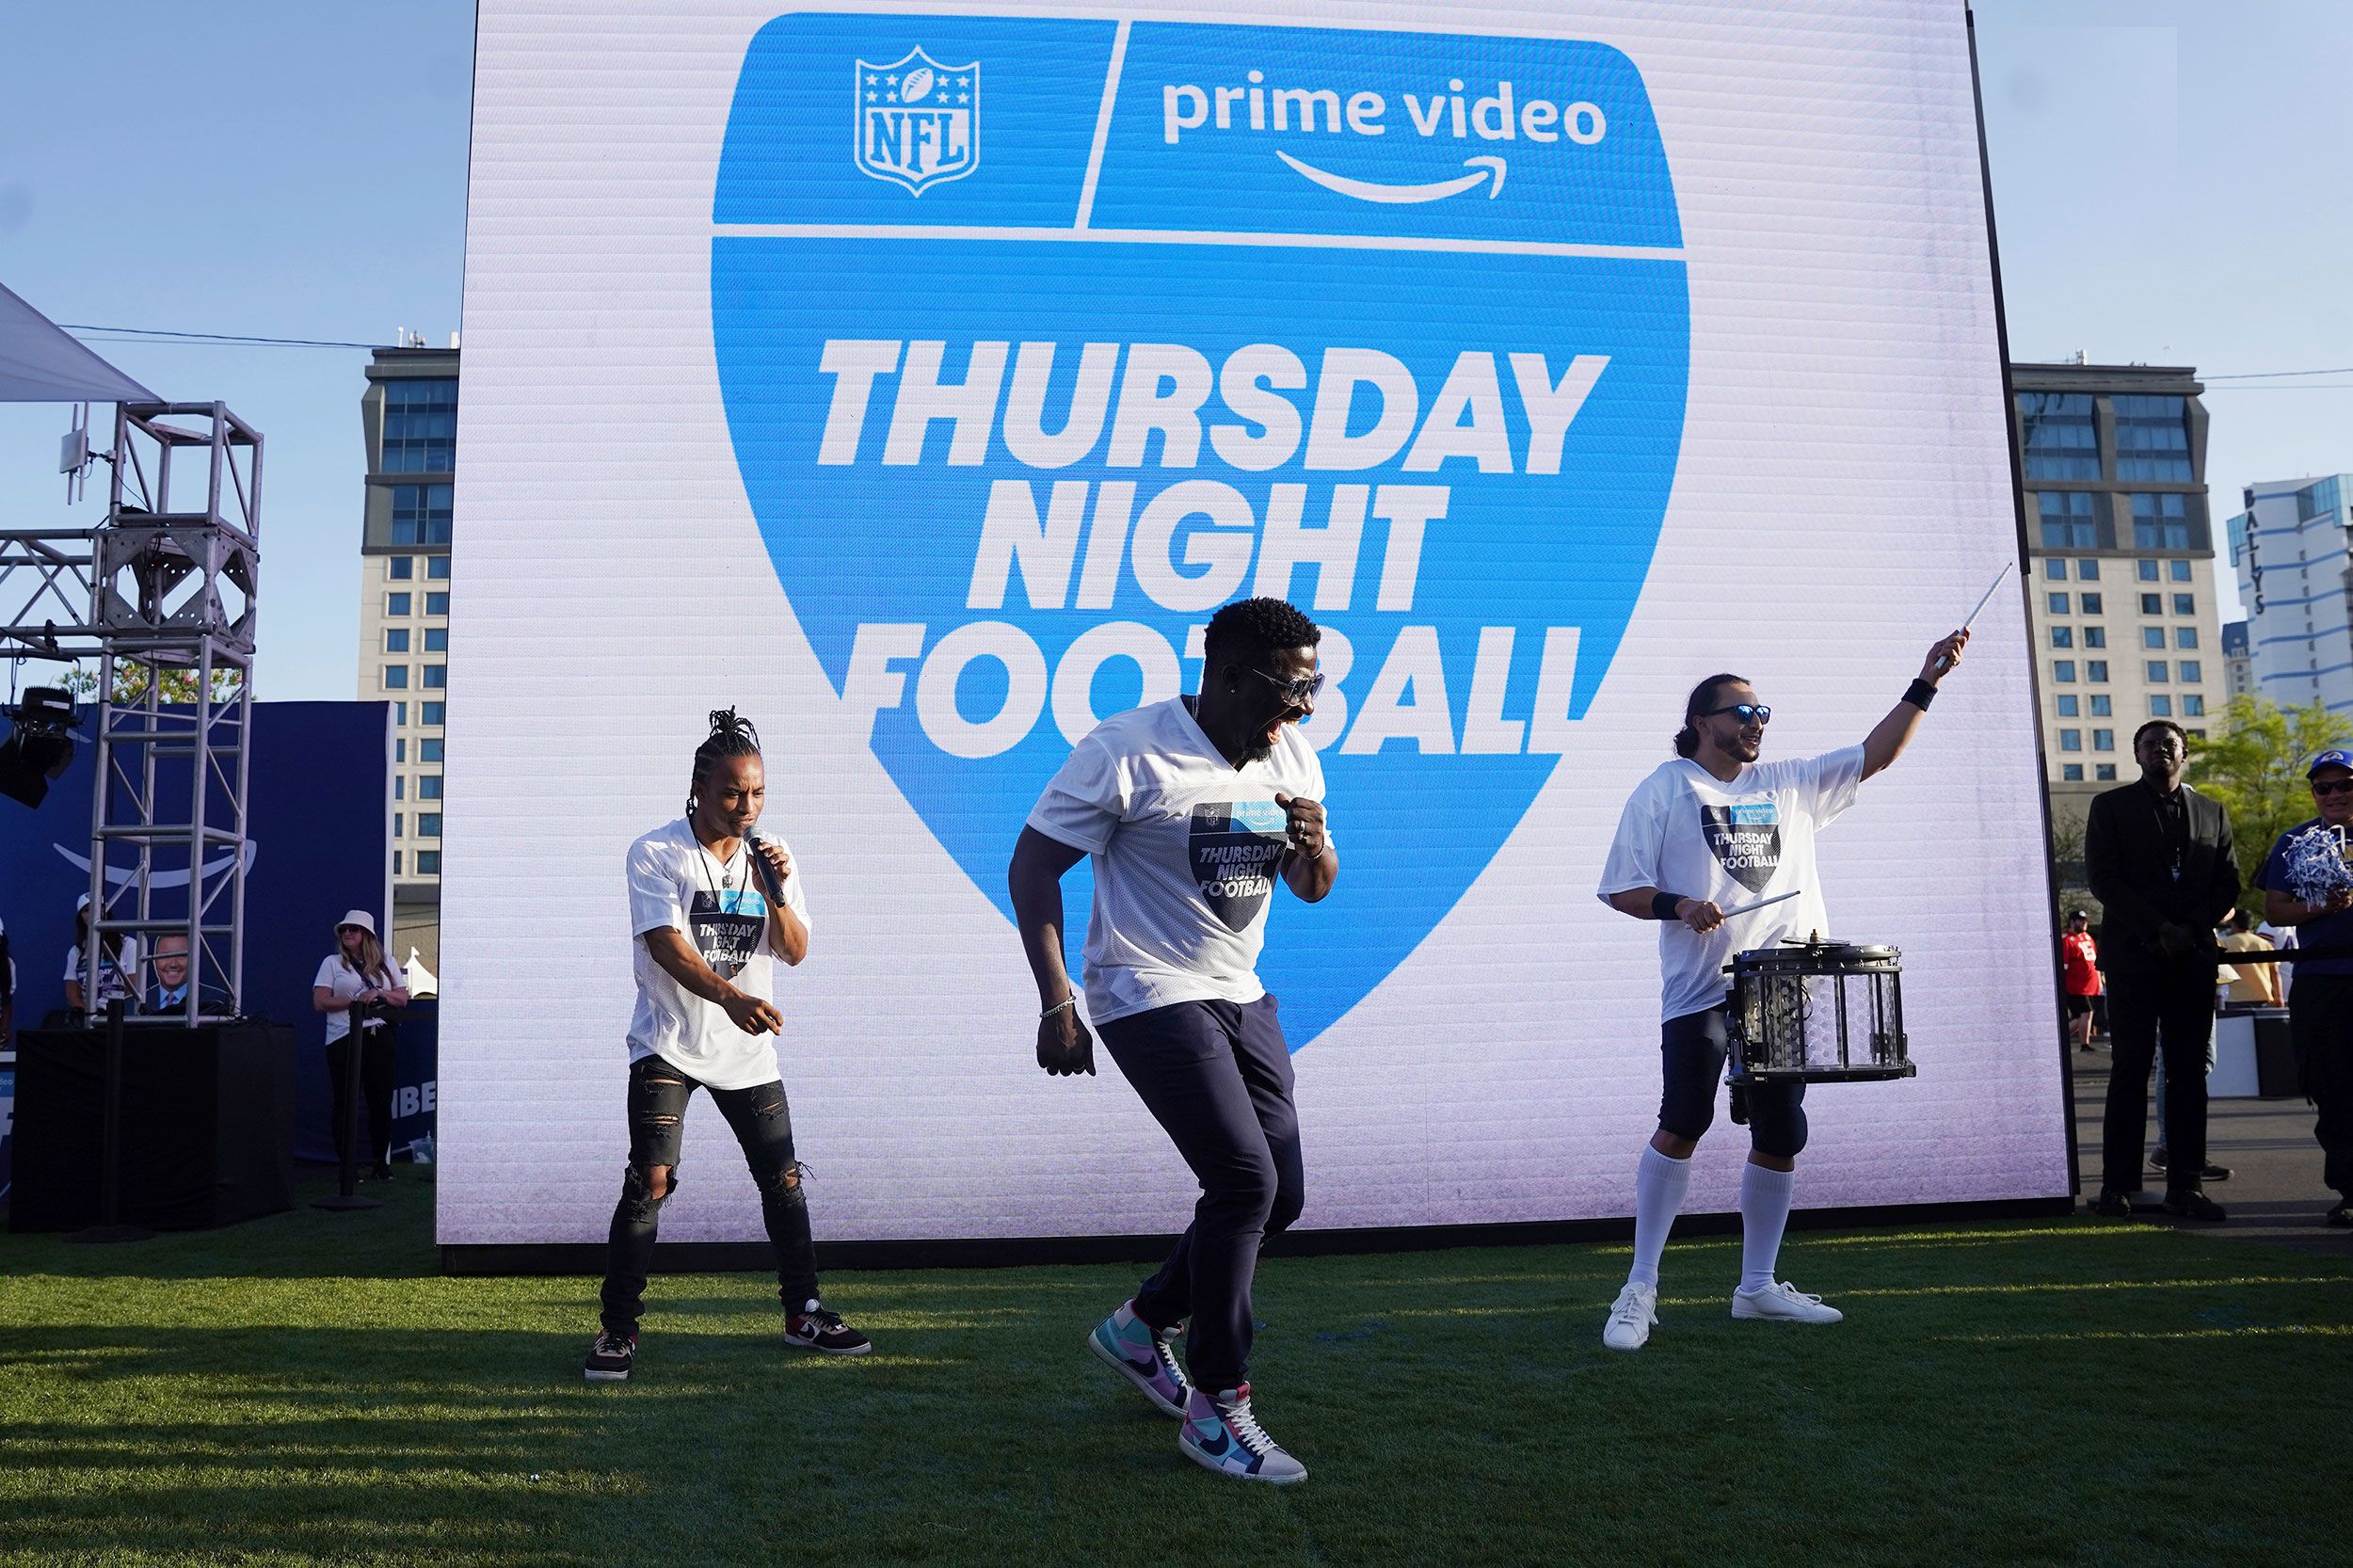 is about to stream its first 'Thursday Night Football' game